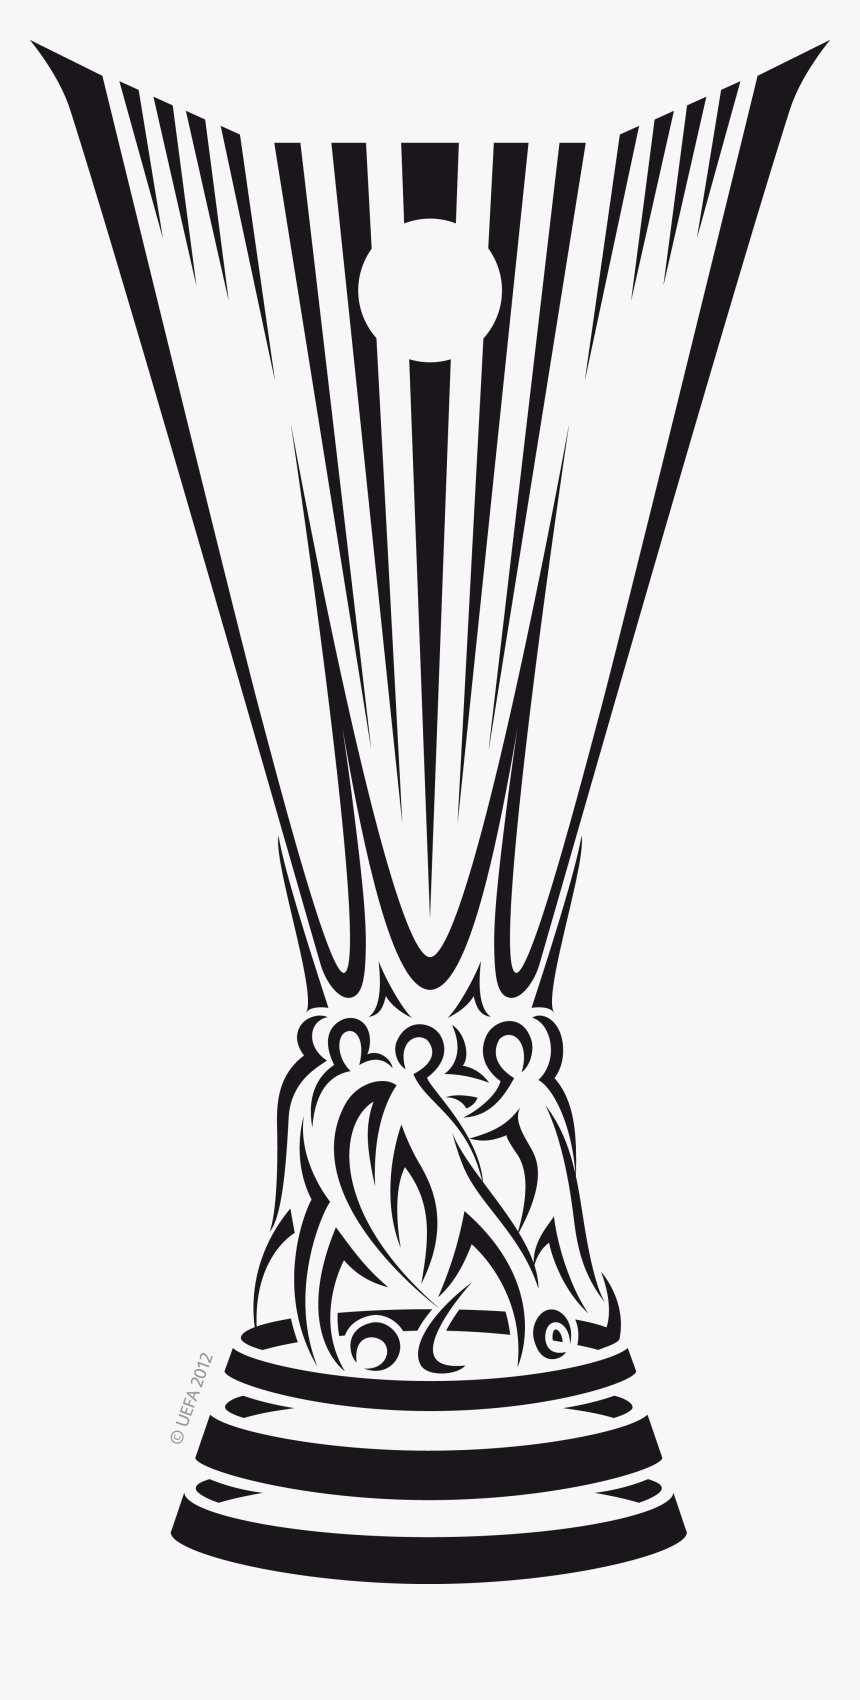 World Uefa Europa League Trophy Pngeuropa League Trophy - Uefa Europa League Trophy Draw, Transparent Png, Free Download